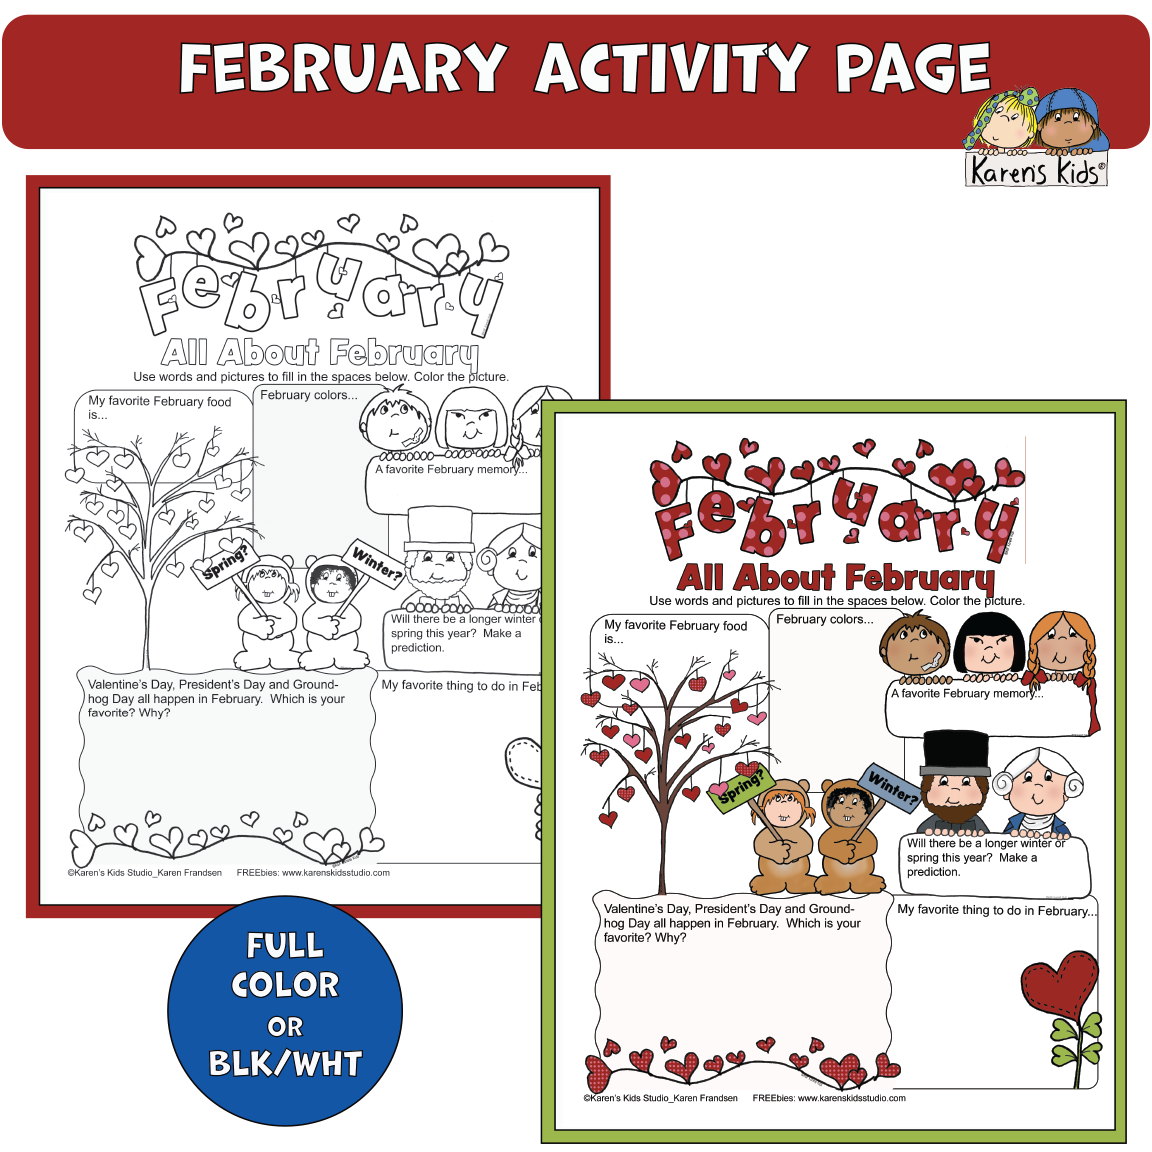 February activity page samples showing black_white and full color pages. Download these freebies.